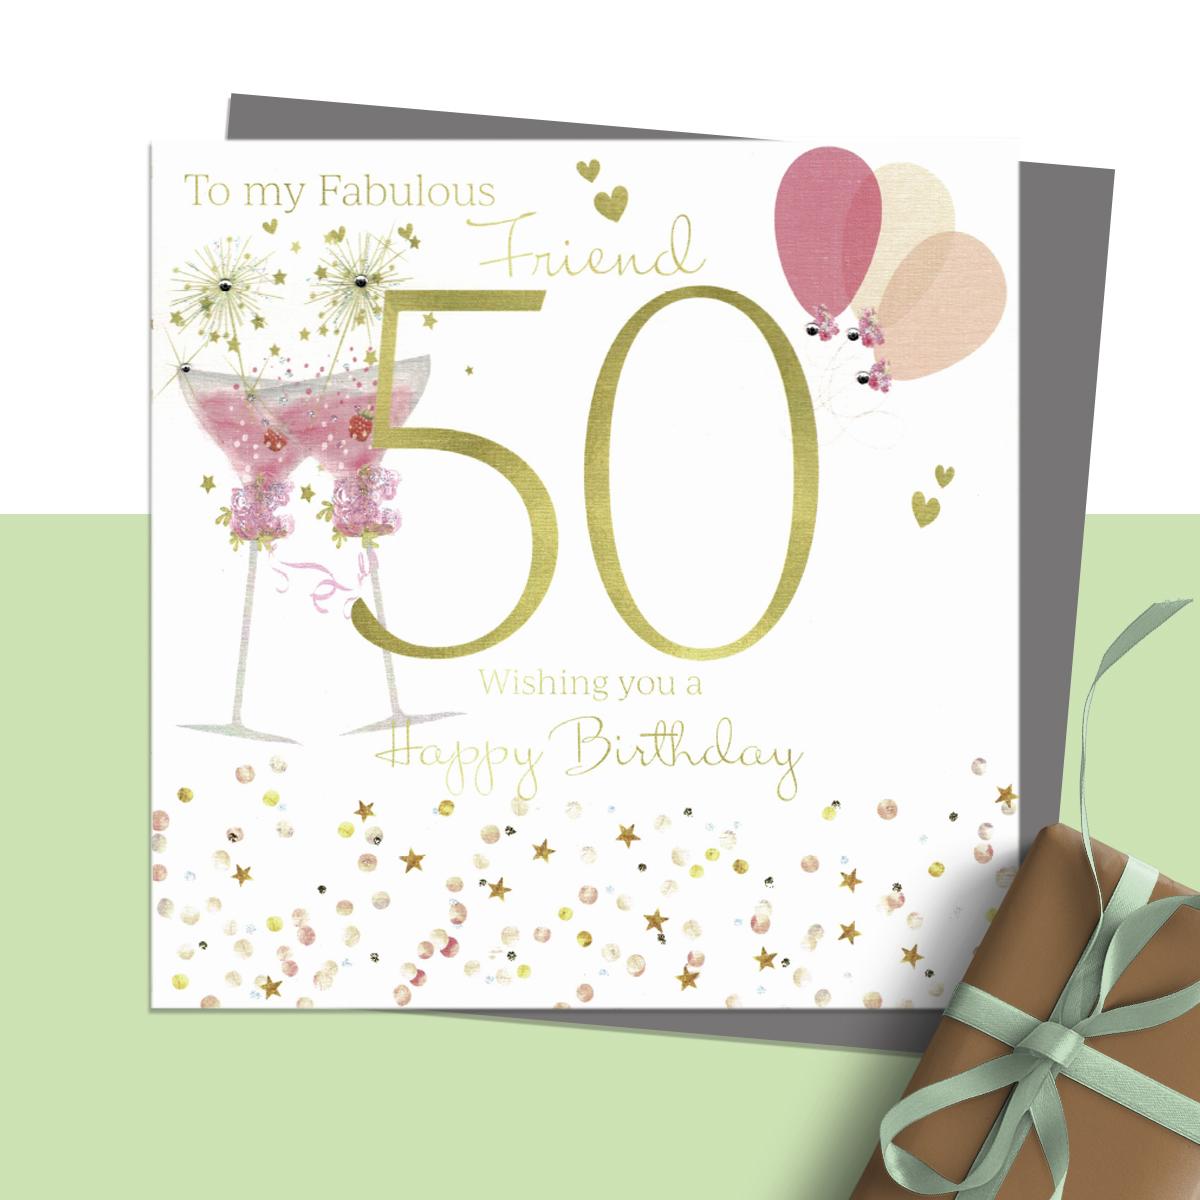 ' To My Fabulous Friend 50 Wishing You A Happy Birthday' Featuring Cocktails, Sparklers and Balloons. Hand Finished With Sparkle And Jewel Embellishments. Blank Inside For Own Message. Complete With Silver Coloured Envelope